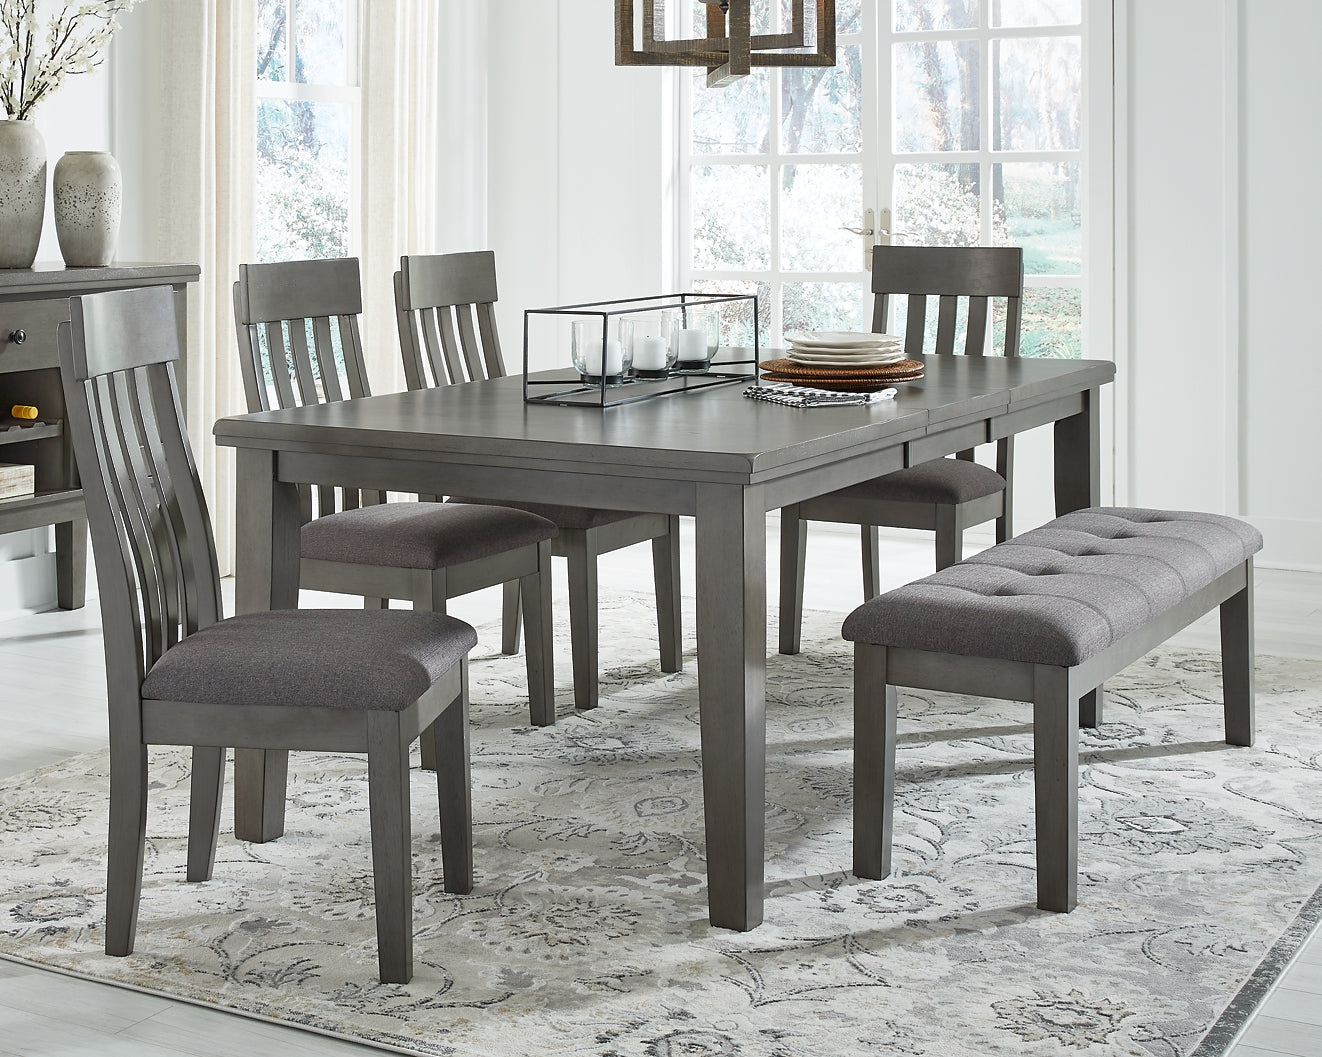 Hallanden Dining Table and 4 Chairs and Bench Wilson Furniture (OH)  in Bridgeport, Ohio. Serving Bridgeport, Yorkville, Bellaire, & Avondale